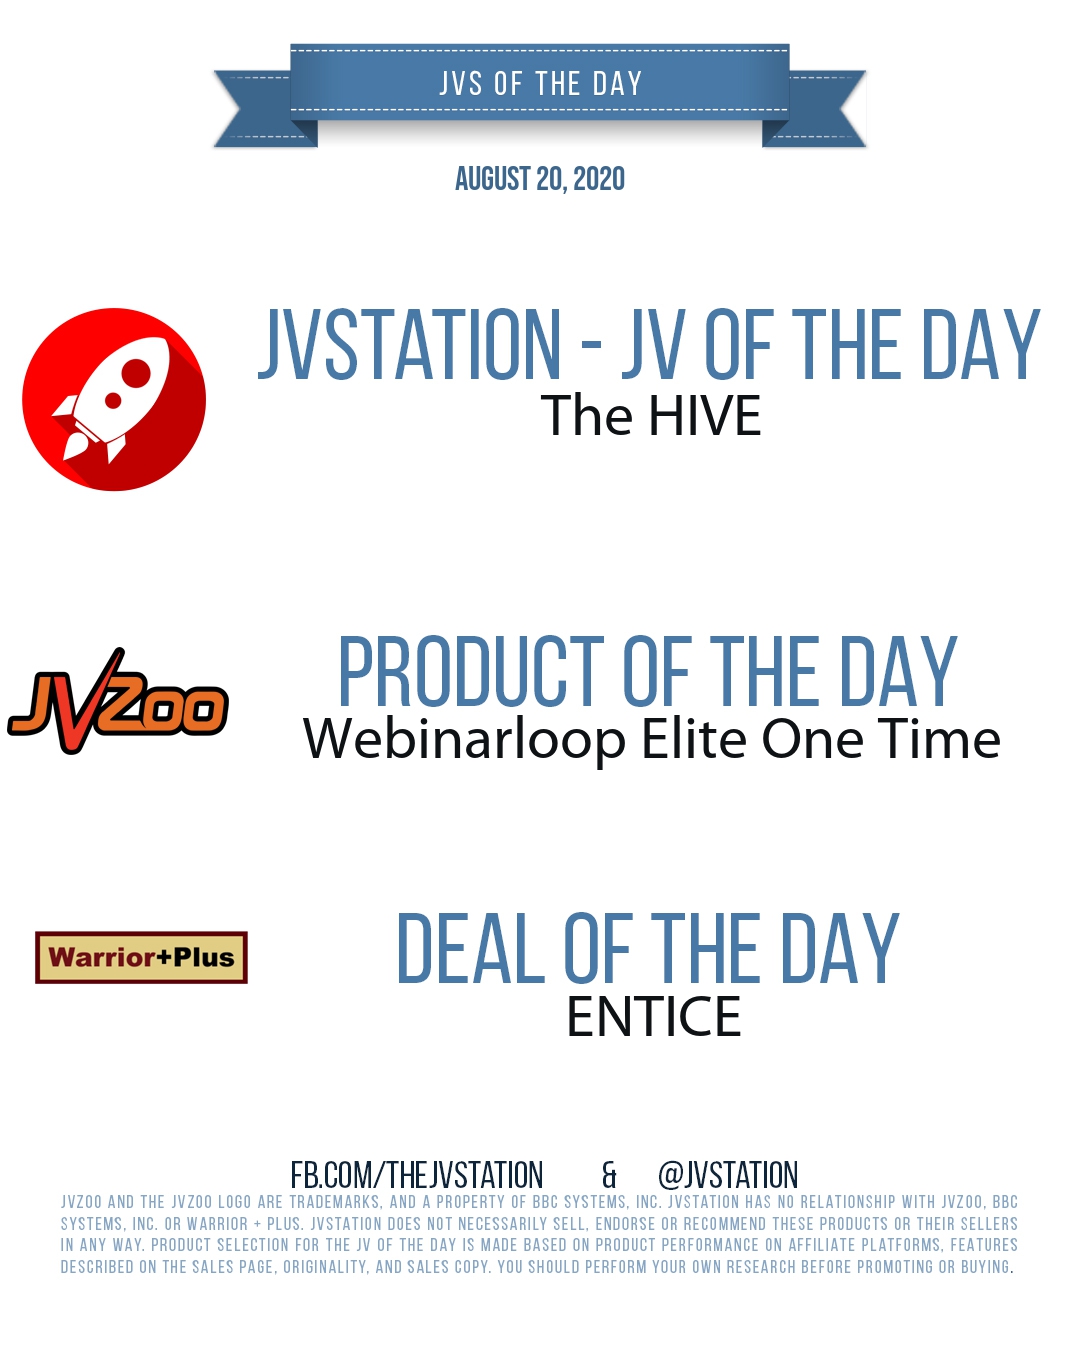 JVs of the day - August 20, 2020